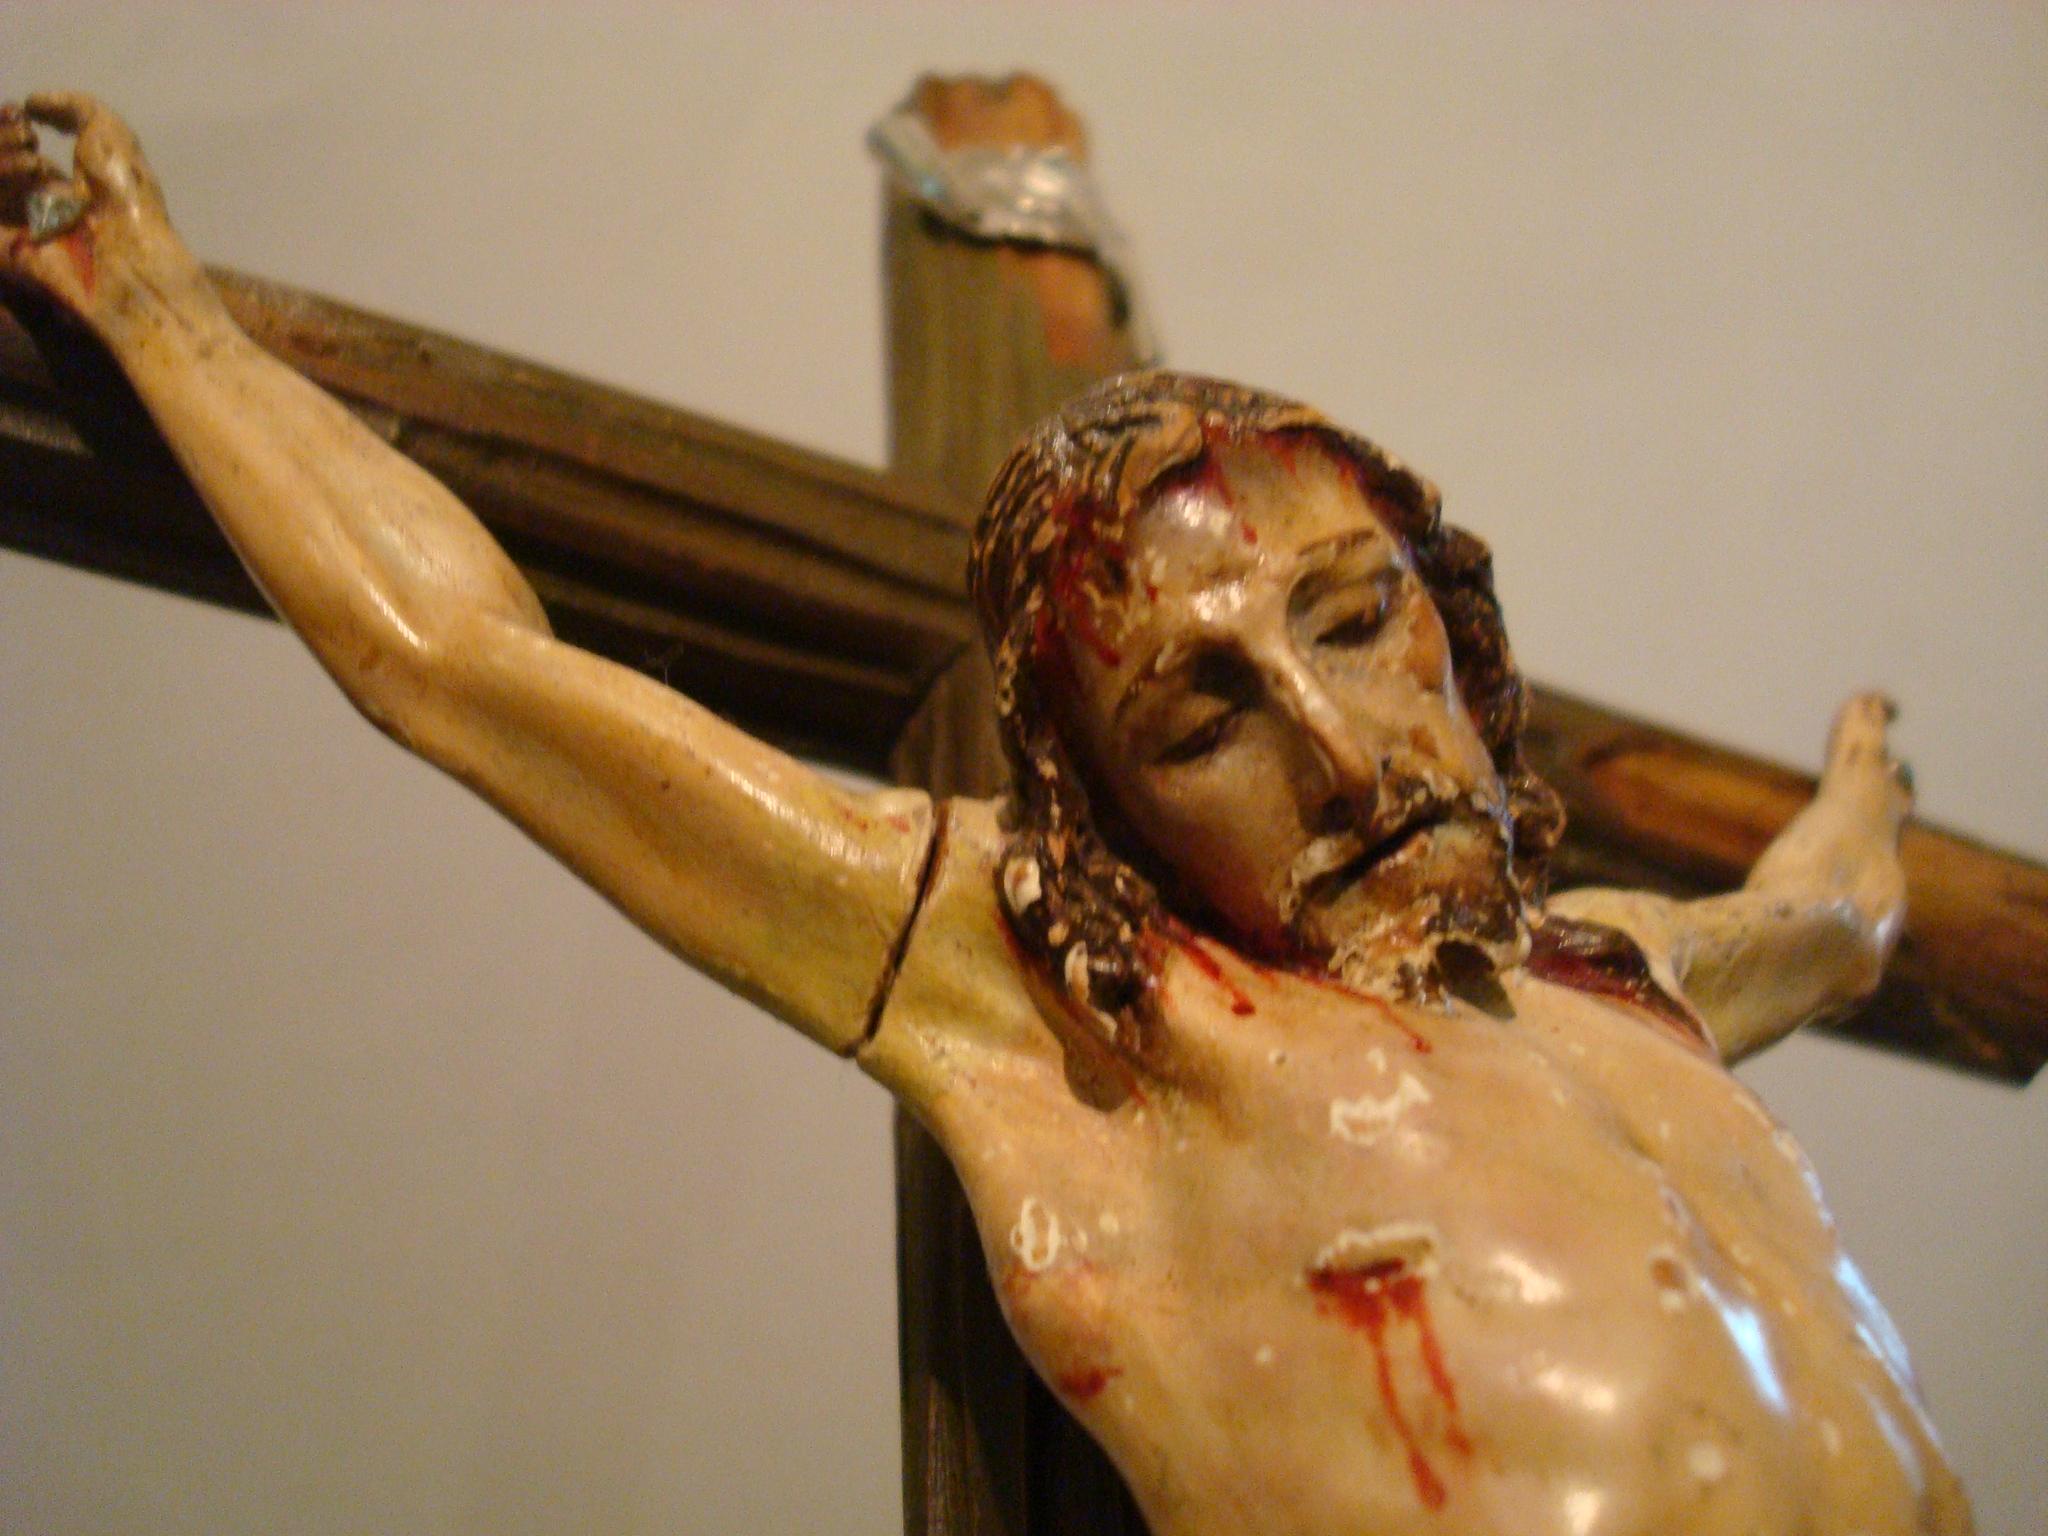 Unknown Hand Carved and Polychromed Wood Table Jesus Crucifix, circa 1850-1880